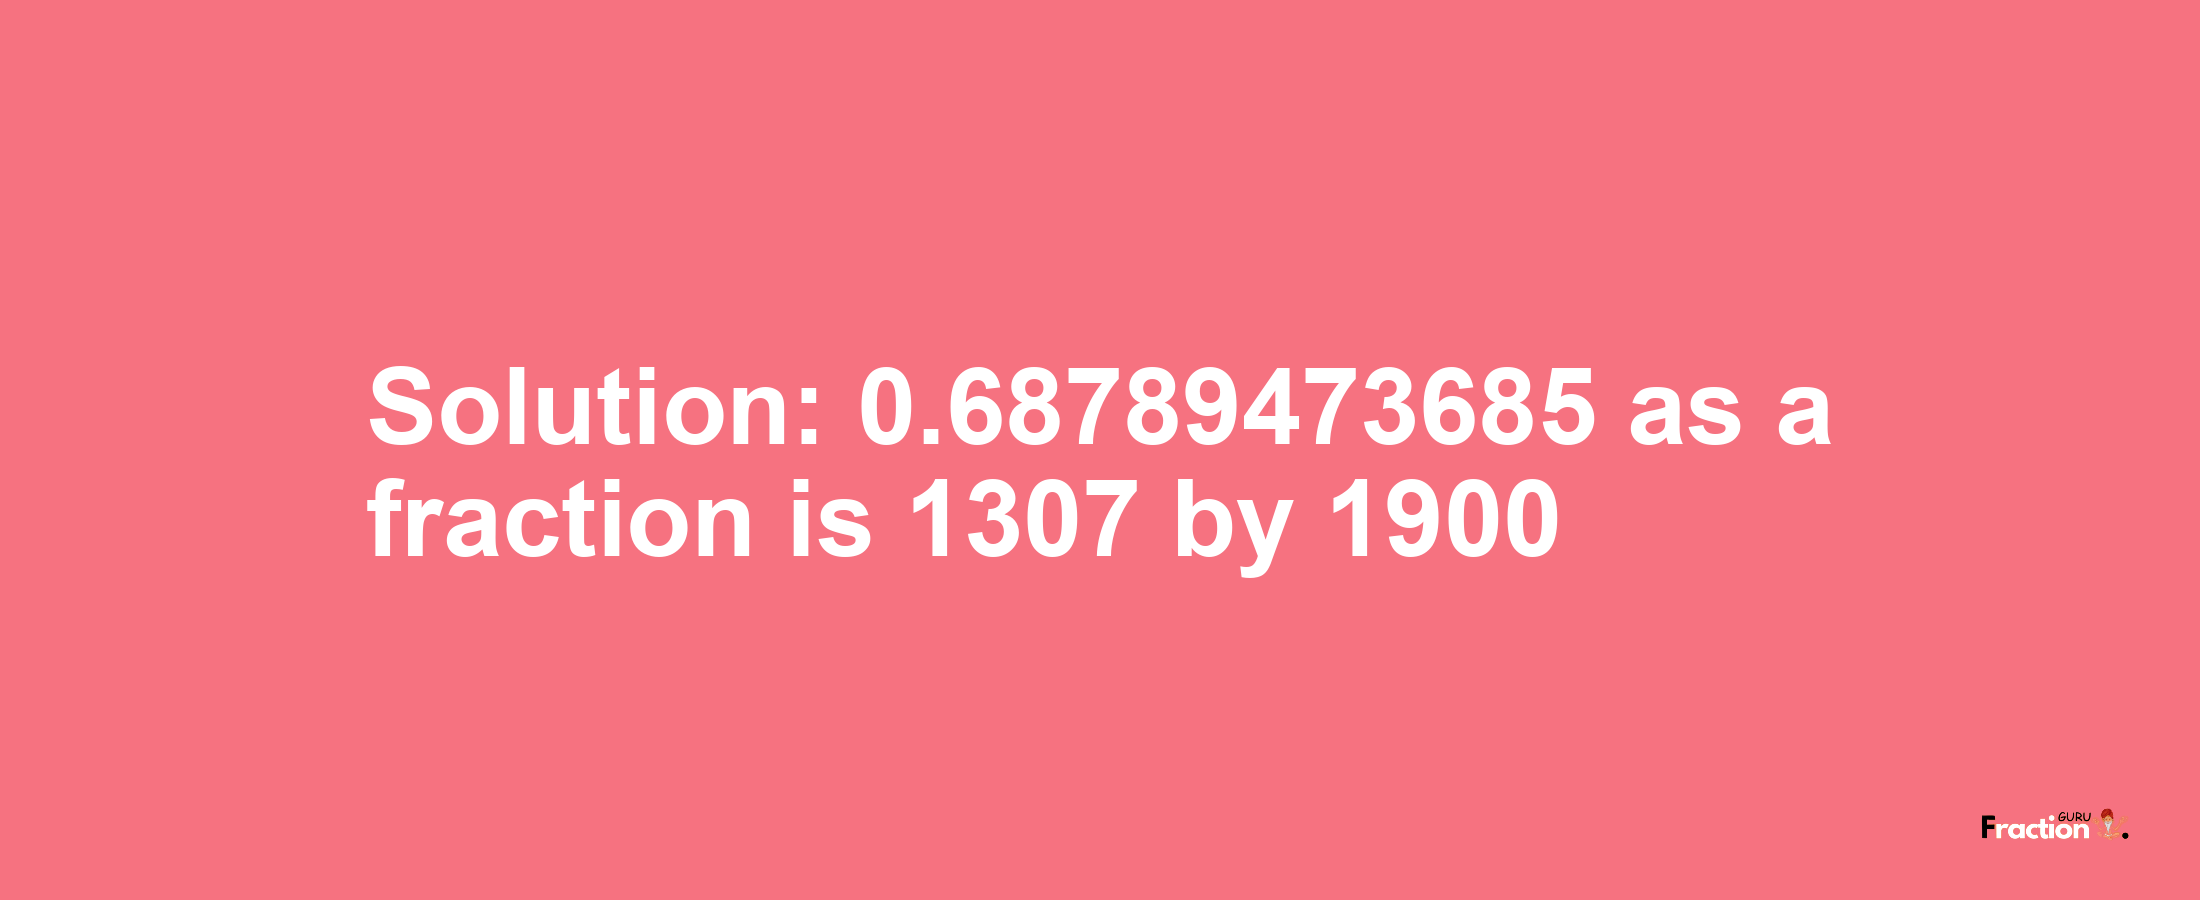 Solution:0.68789473685 as a fraction is 1307/1900